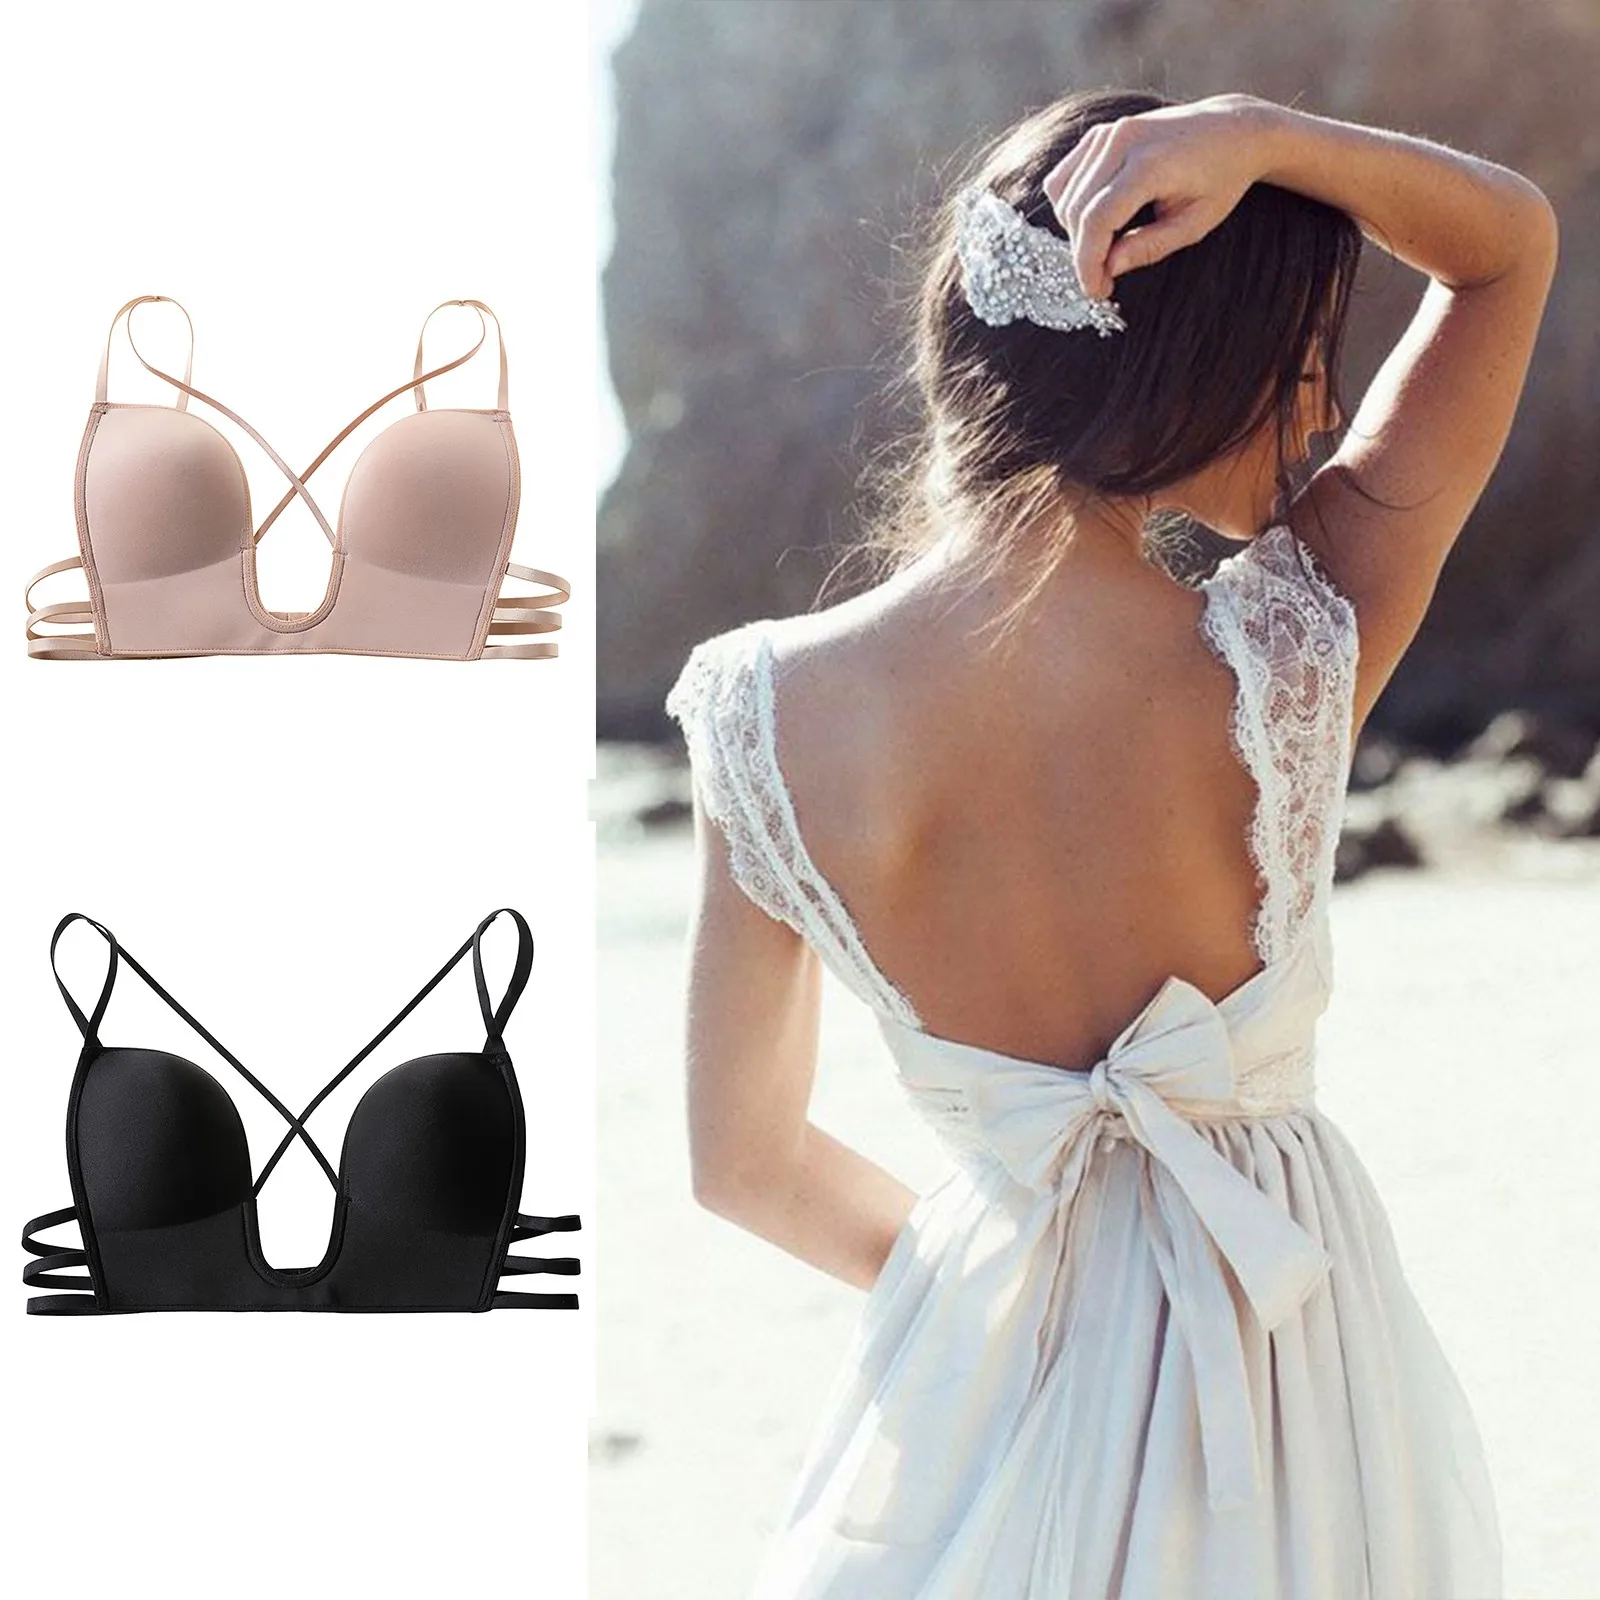 Yandw Sexy Lace Deep V Plunge Push Up Bra For Women Clear Straps Padded  Convertible Underwire Wedding Brassire 